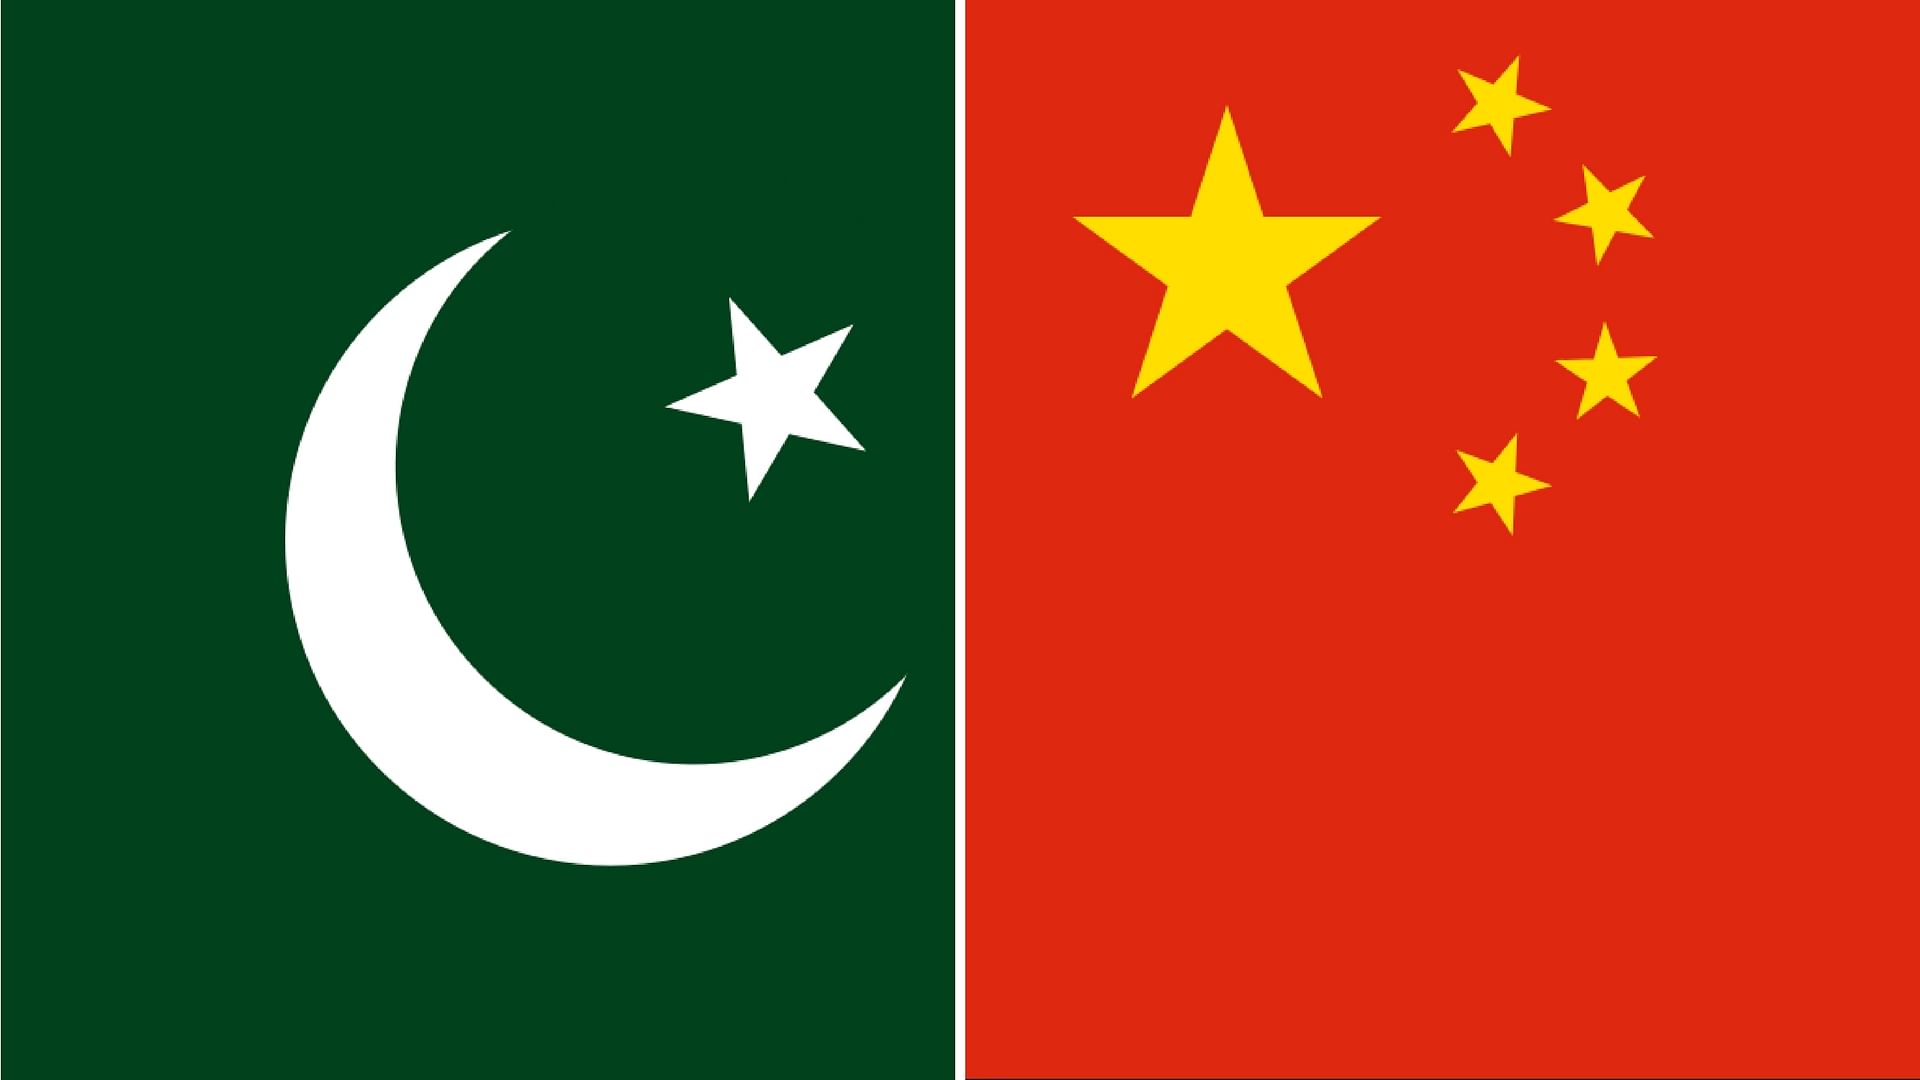 Pakistan is in talks with a Chinese financial institution to obtain $1 billion as a foreign commercial loan.